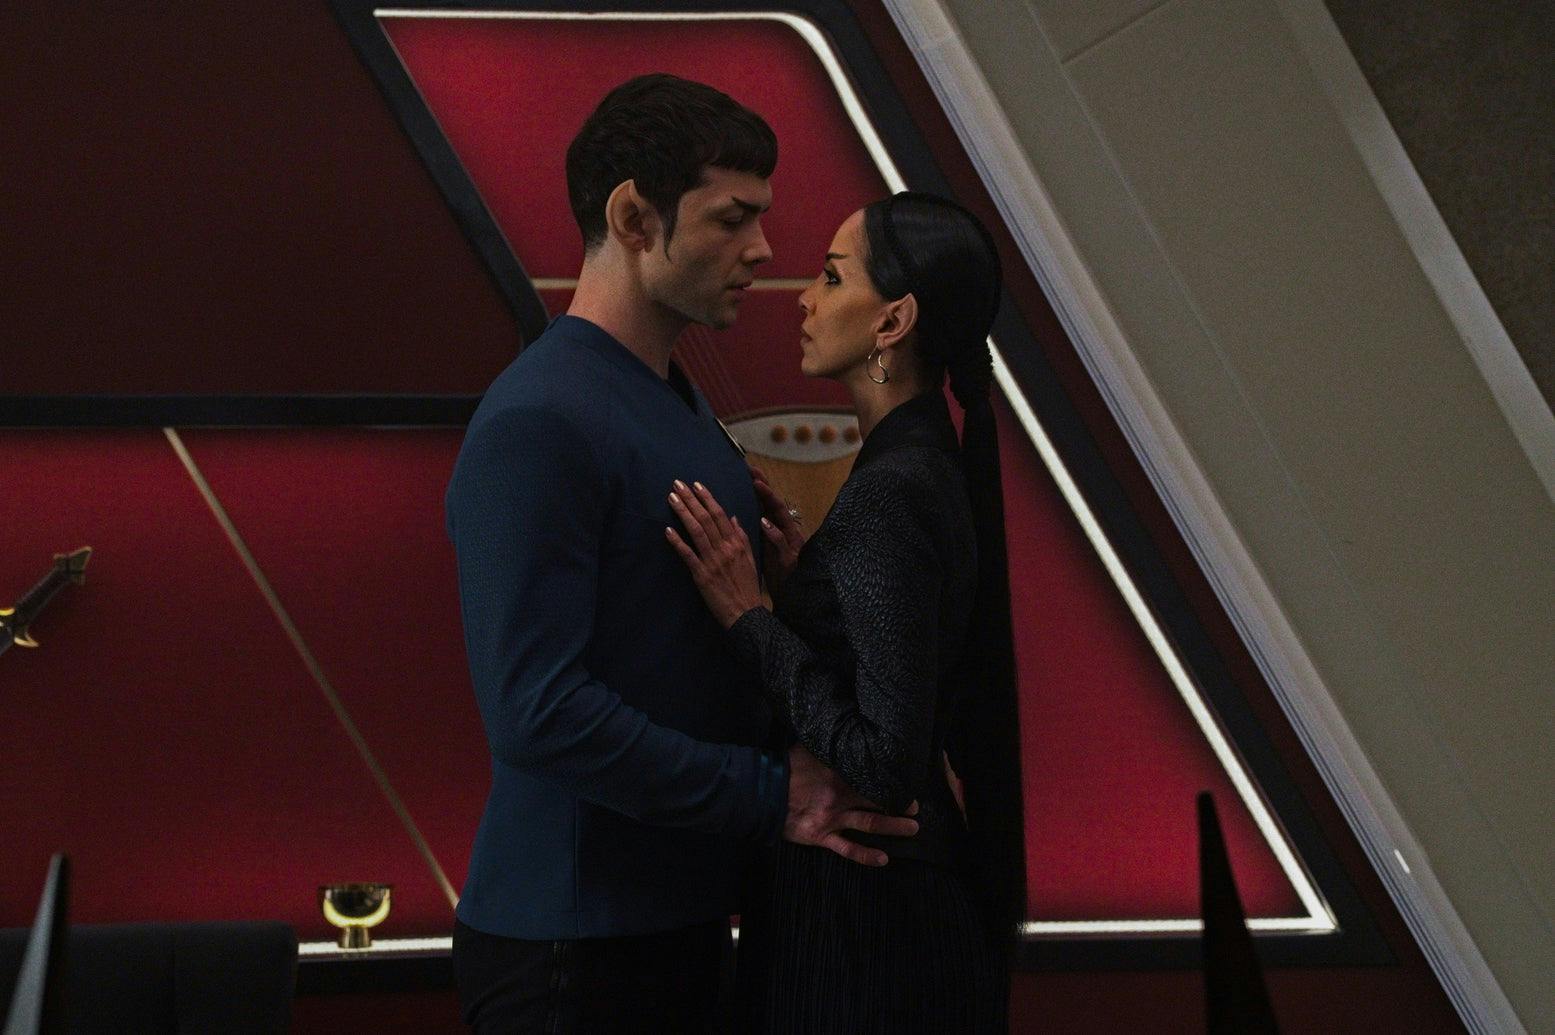 Spock and T'Pring (Strange New Worlds) stand close together, with T'Pring's hands on Spock's chest in 'Spock Amok'